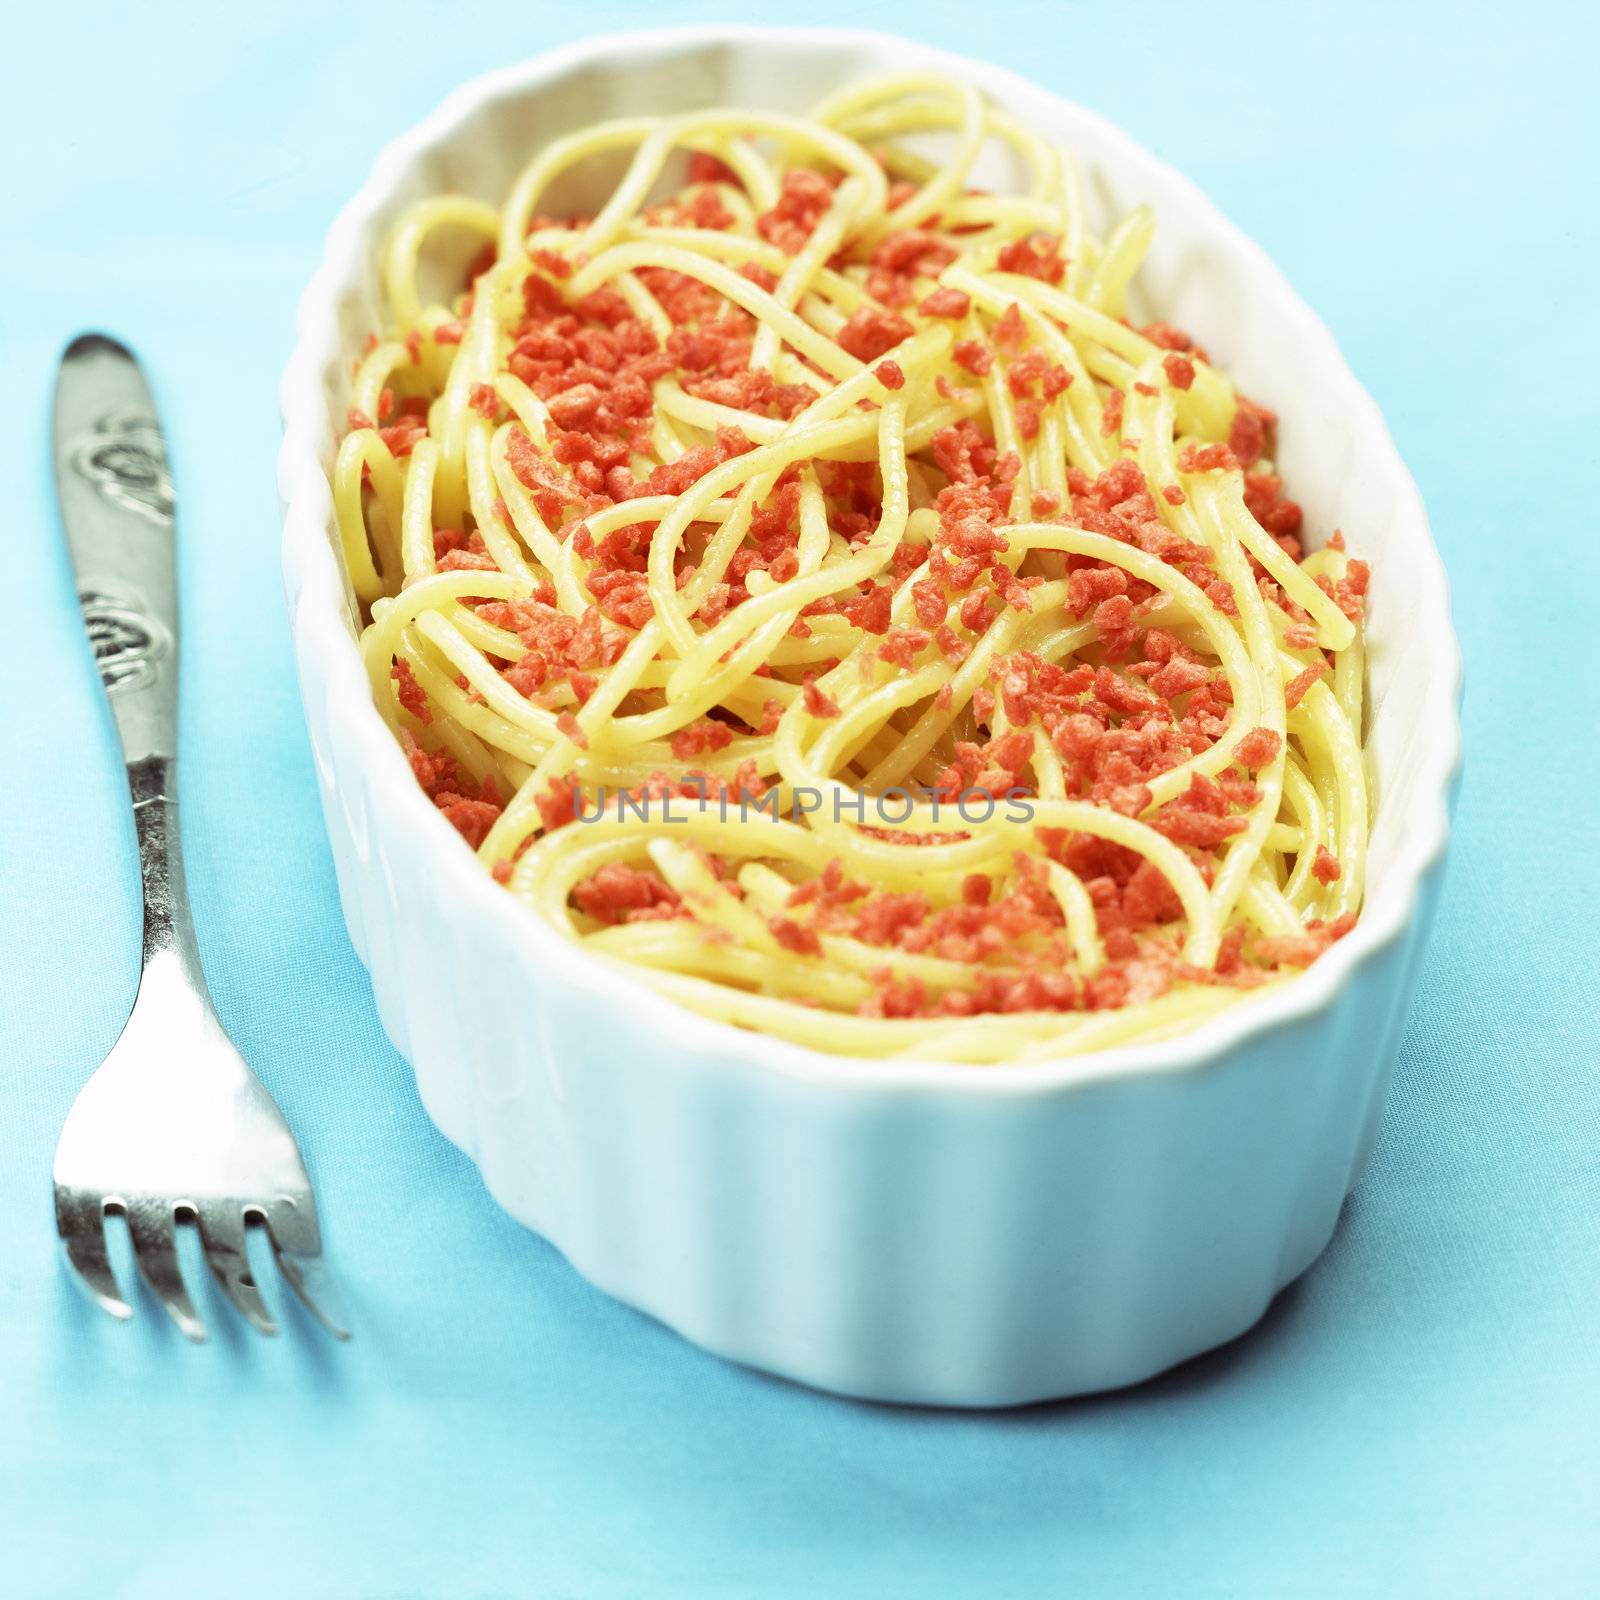 spaghetti with bacon bits by zkruger